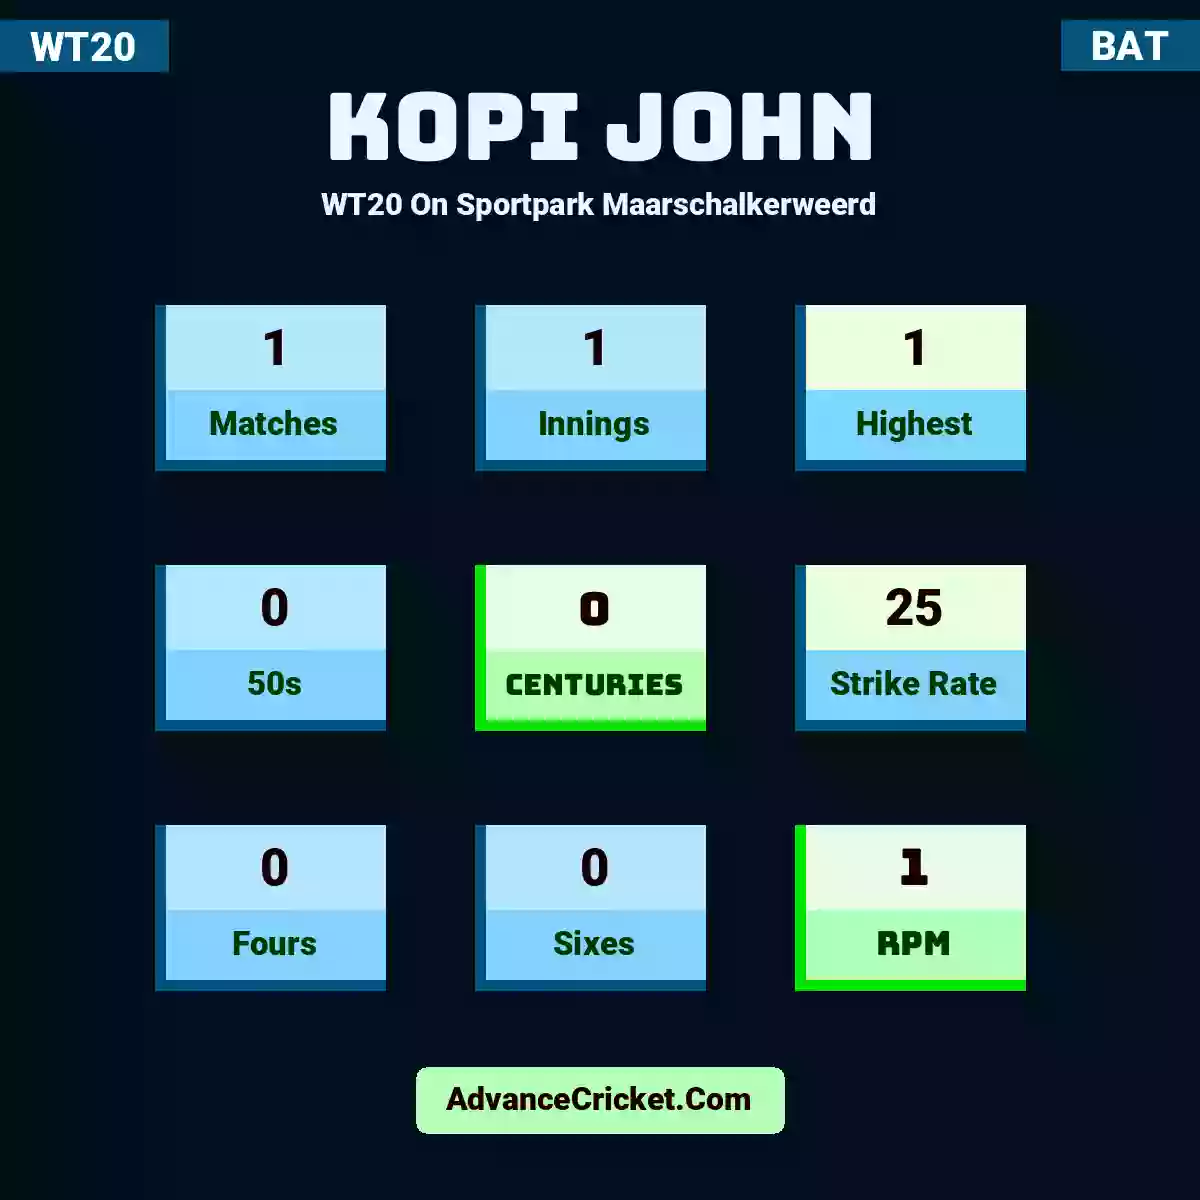 Kopi John WT20  On Sportpark Maarschalkerweerd, Kopi John played 1 matches, scored 1 runs as highest, 0 half-centuries, and 0 centuries, with a strike rate of 25. K.John hit 0 fours and 0 sixes, with an RPM of 1.